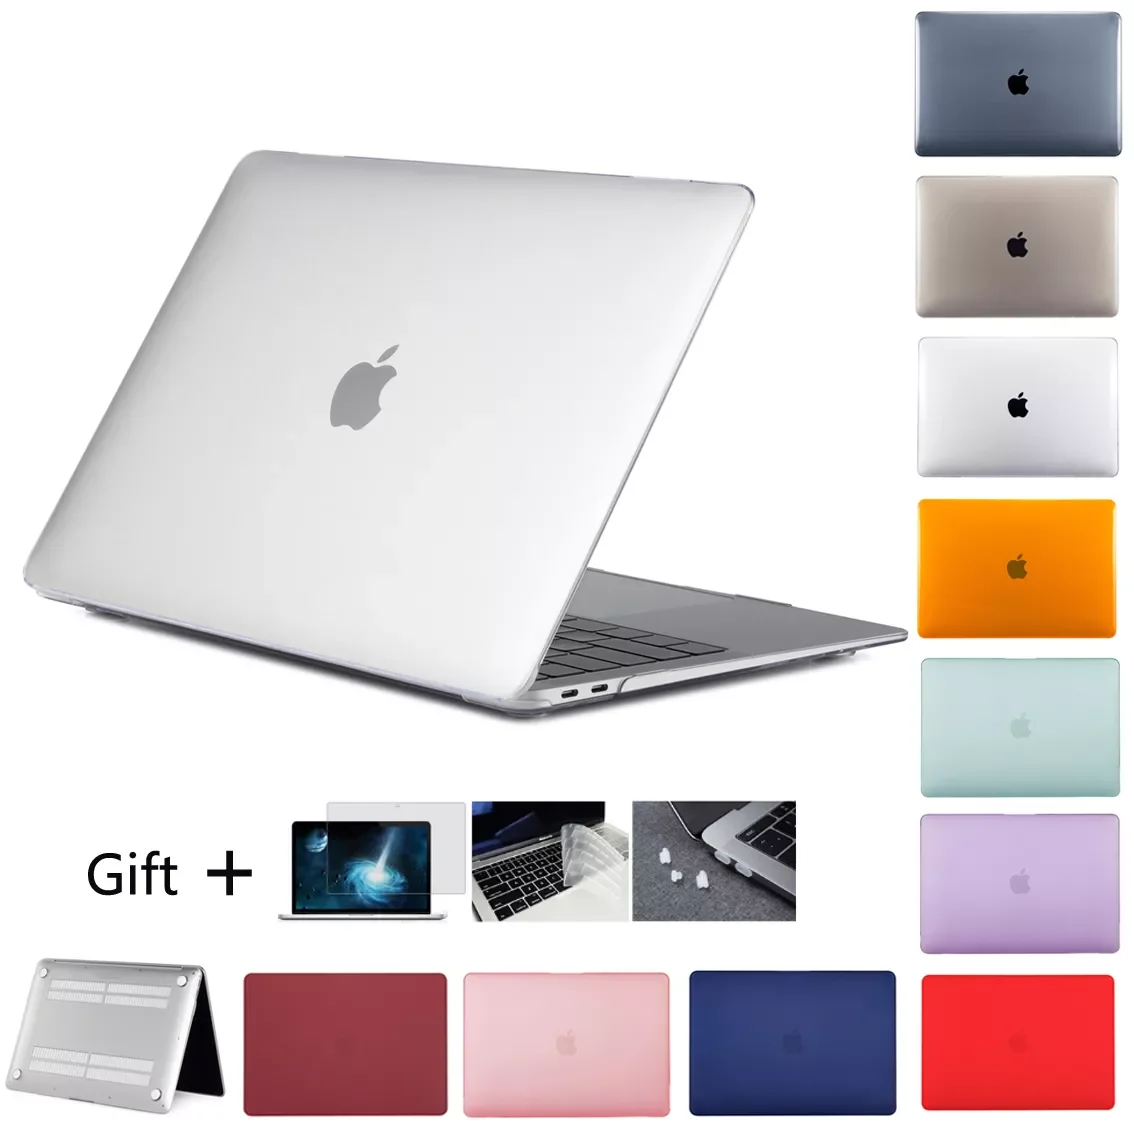 

2021 New Laptop Case For Macbook M1 Air Pro/Max 16 14 13 inch Chip A2442A2485A2179A2337A2338A2289 Touch bar/ID 11 12 15inch case